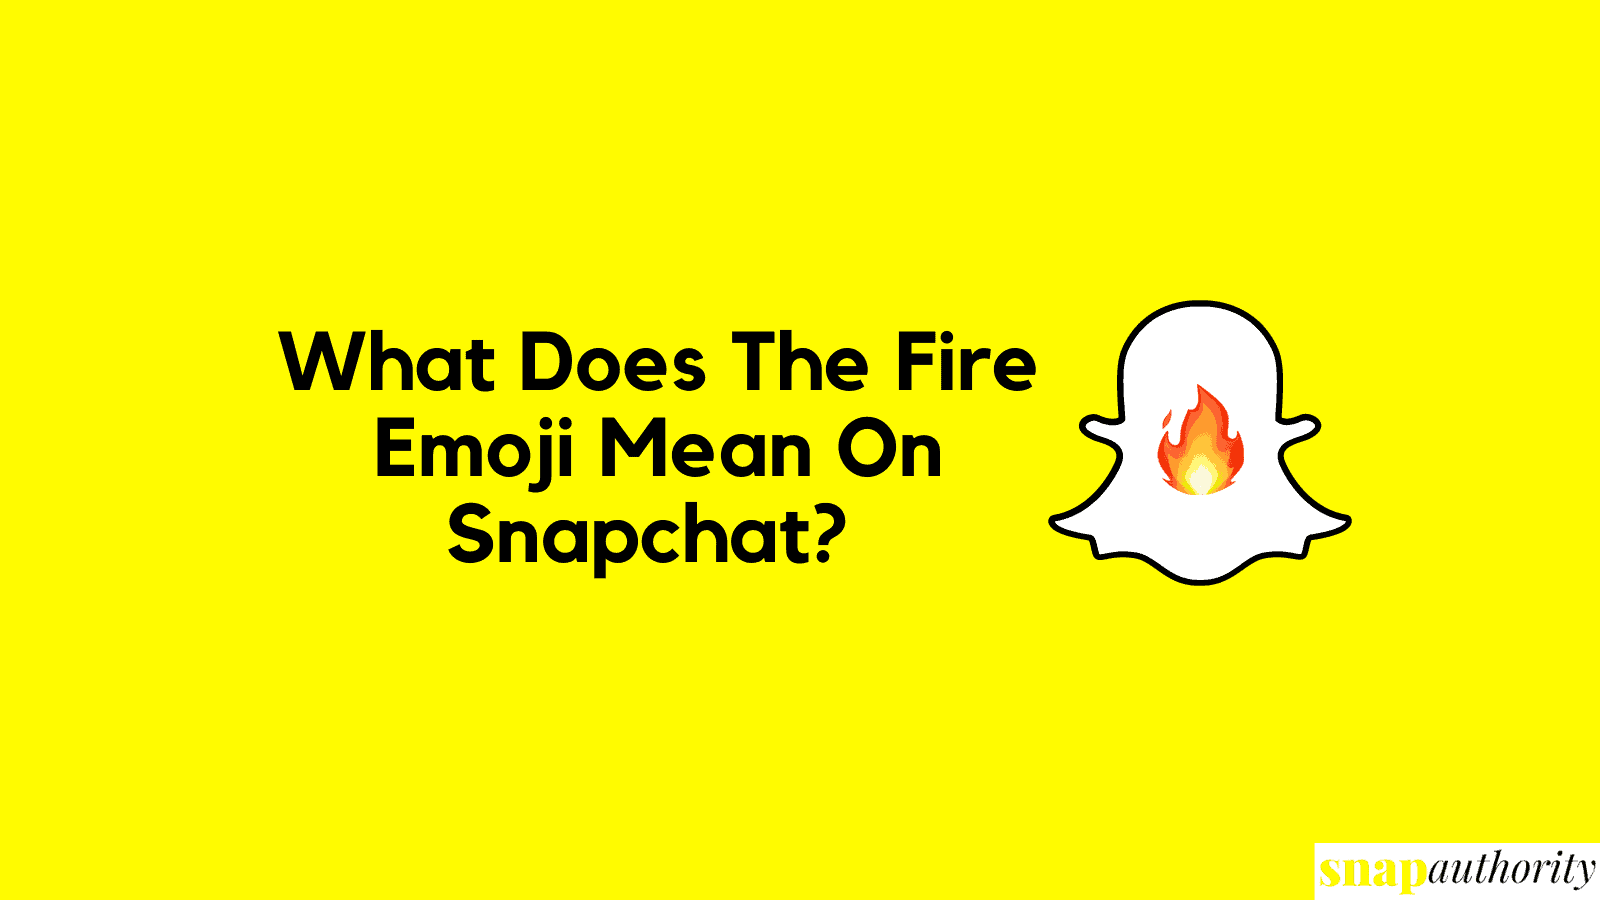 Snapchat fire emoji meaning